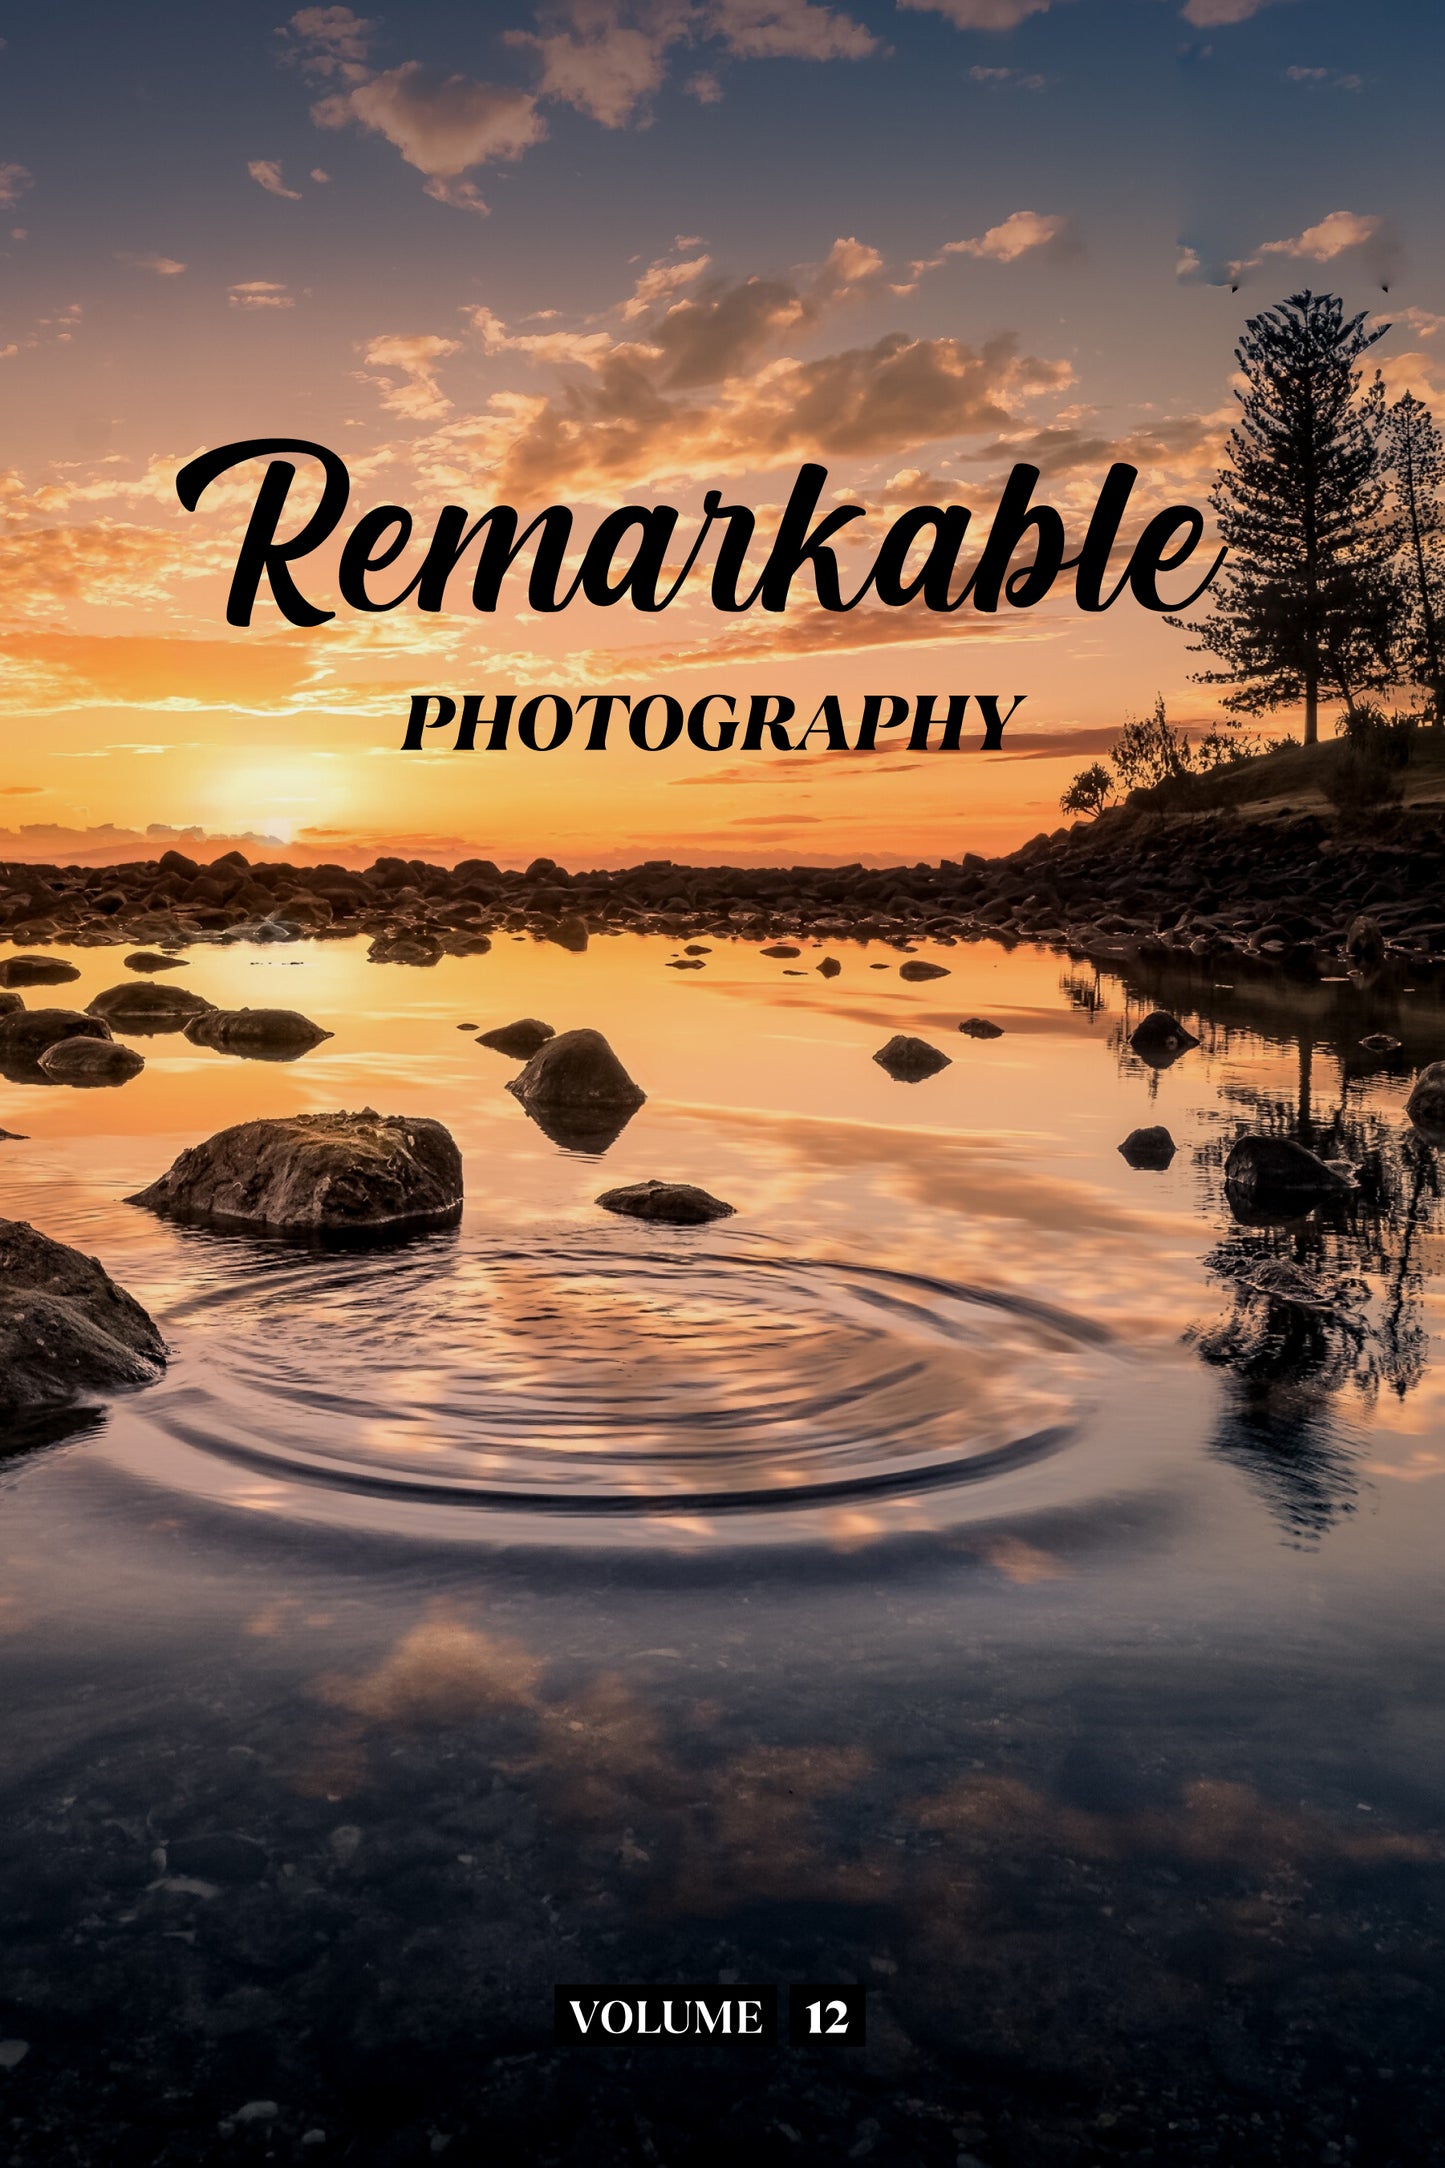 Remarkable Photography Volume 12 (Physical Book)